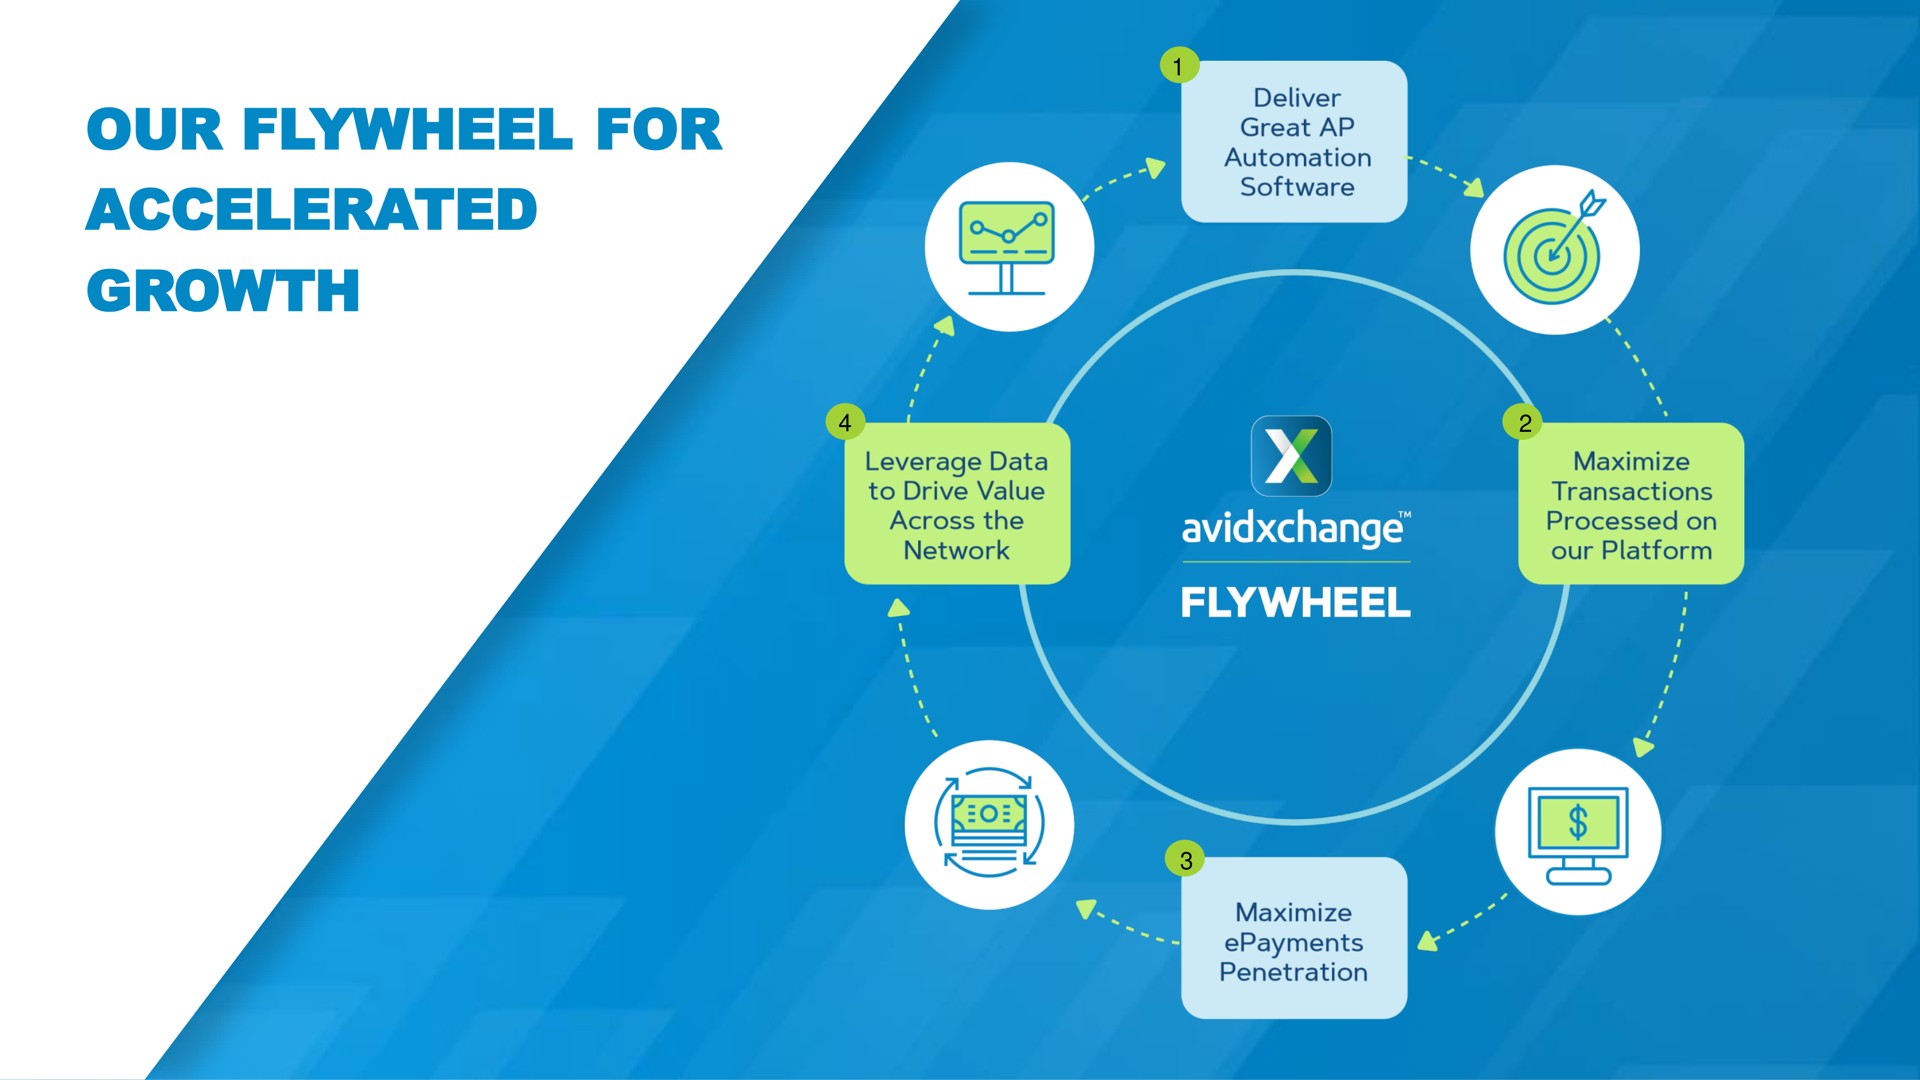 our flywheel for accelerated growth | AvidXchange